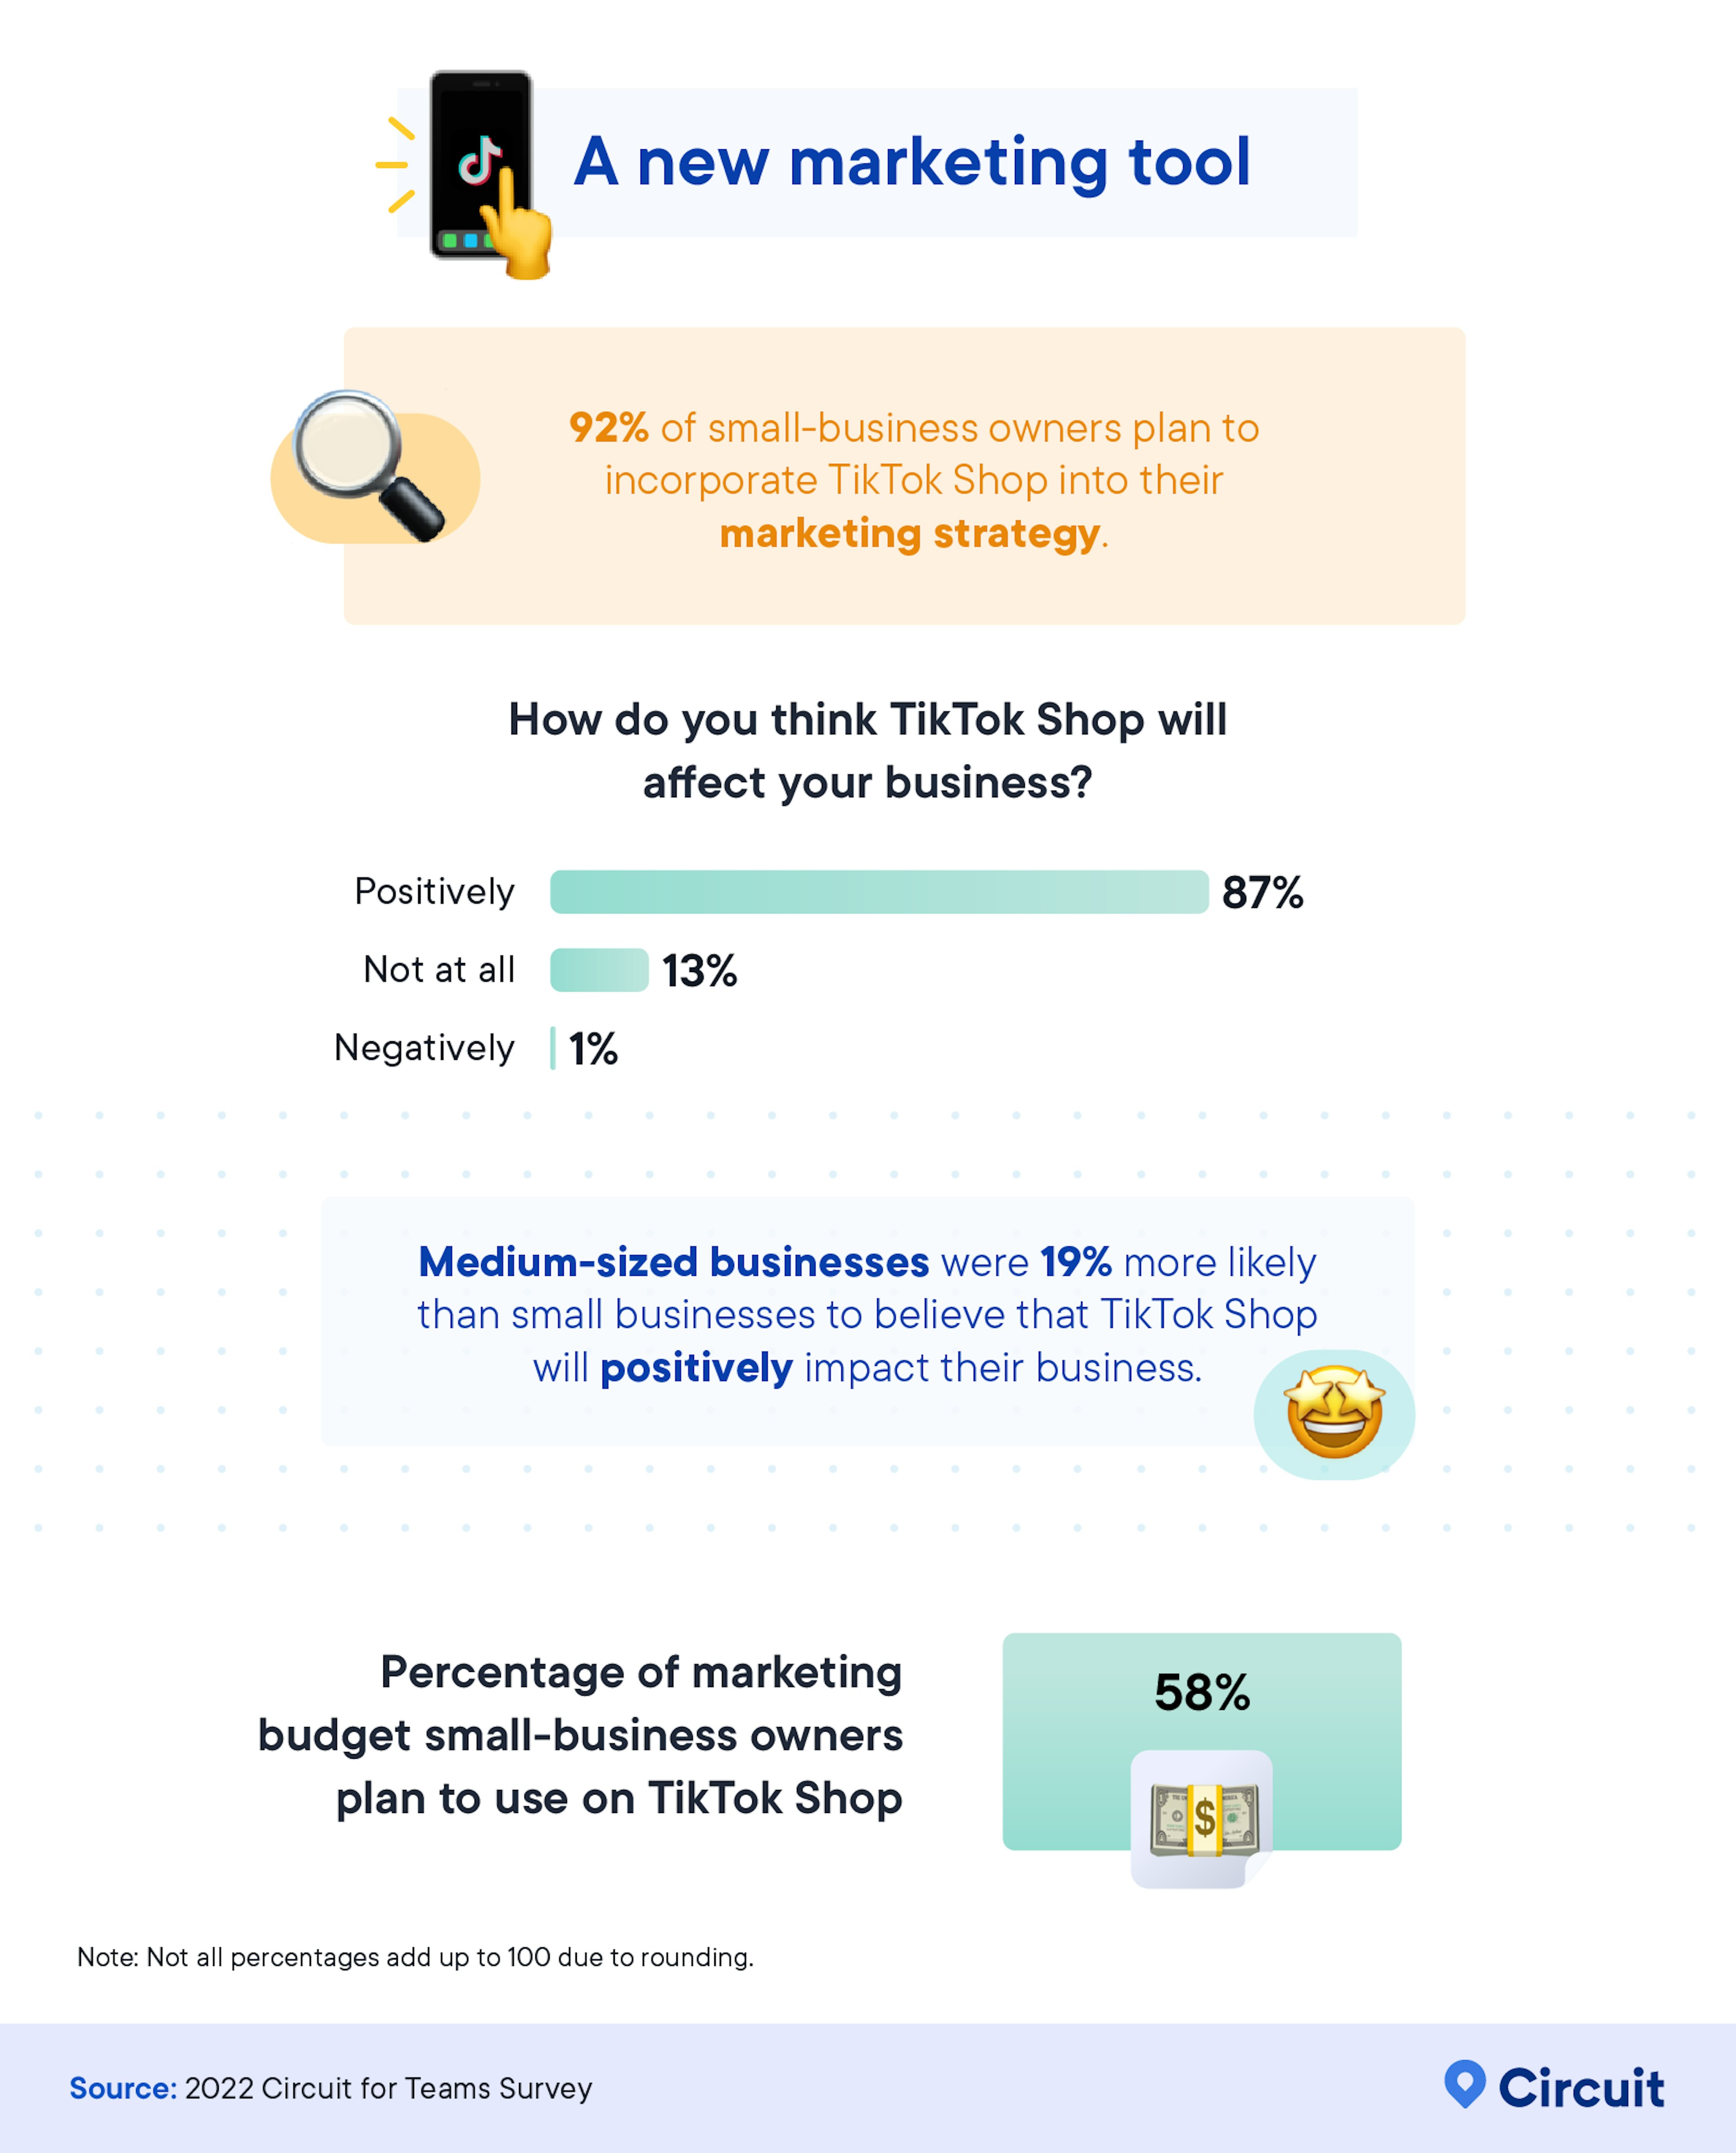 How do businesses of different sizes plan to incorporate TikTok Shop into their marketing strategies?